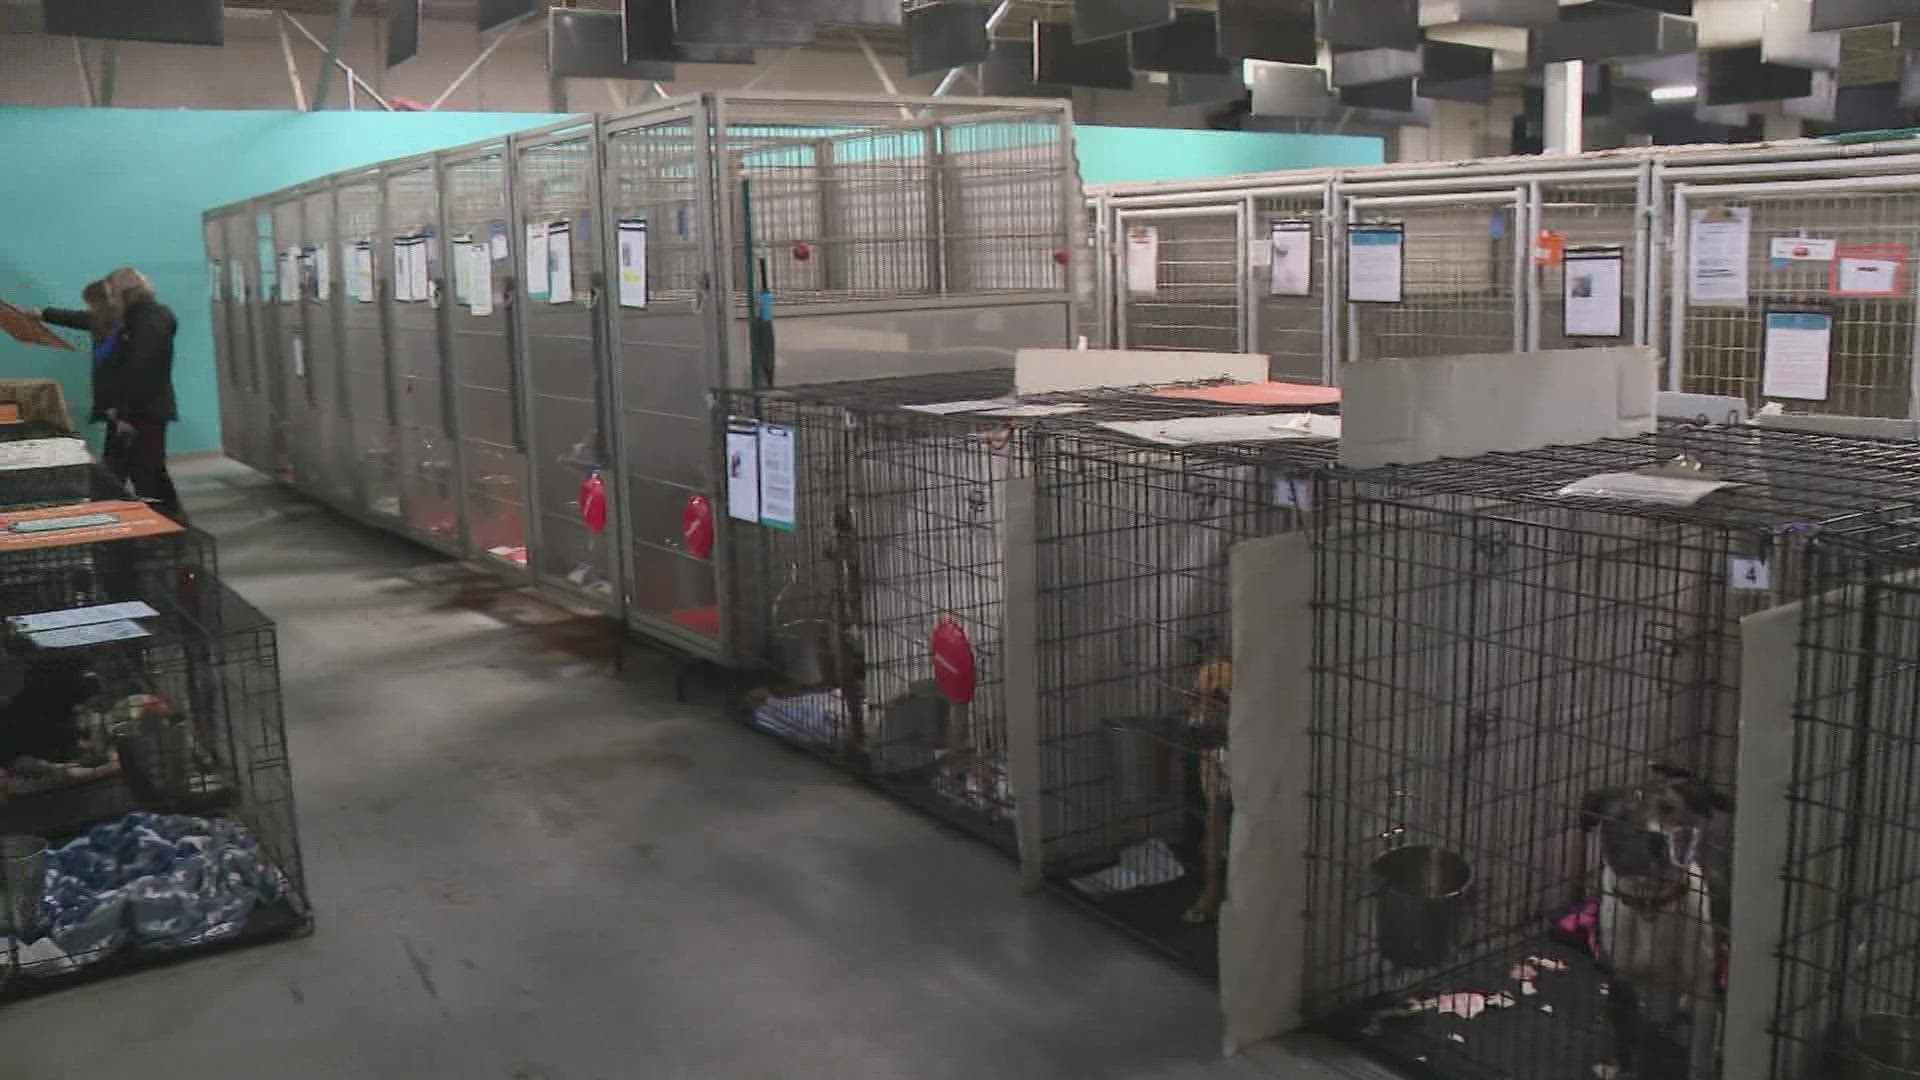 In a little over a week animal control brought in more than 70 dogs to CARE STL Adoption Center. They need about 50 foster homes currently.